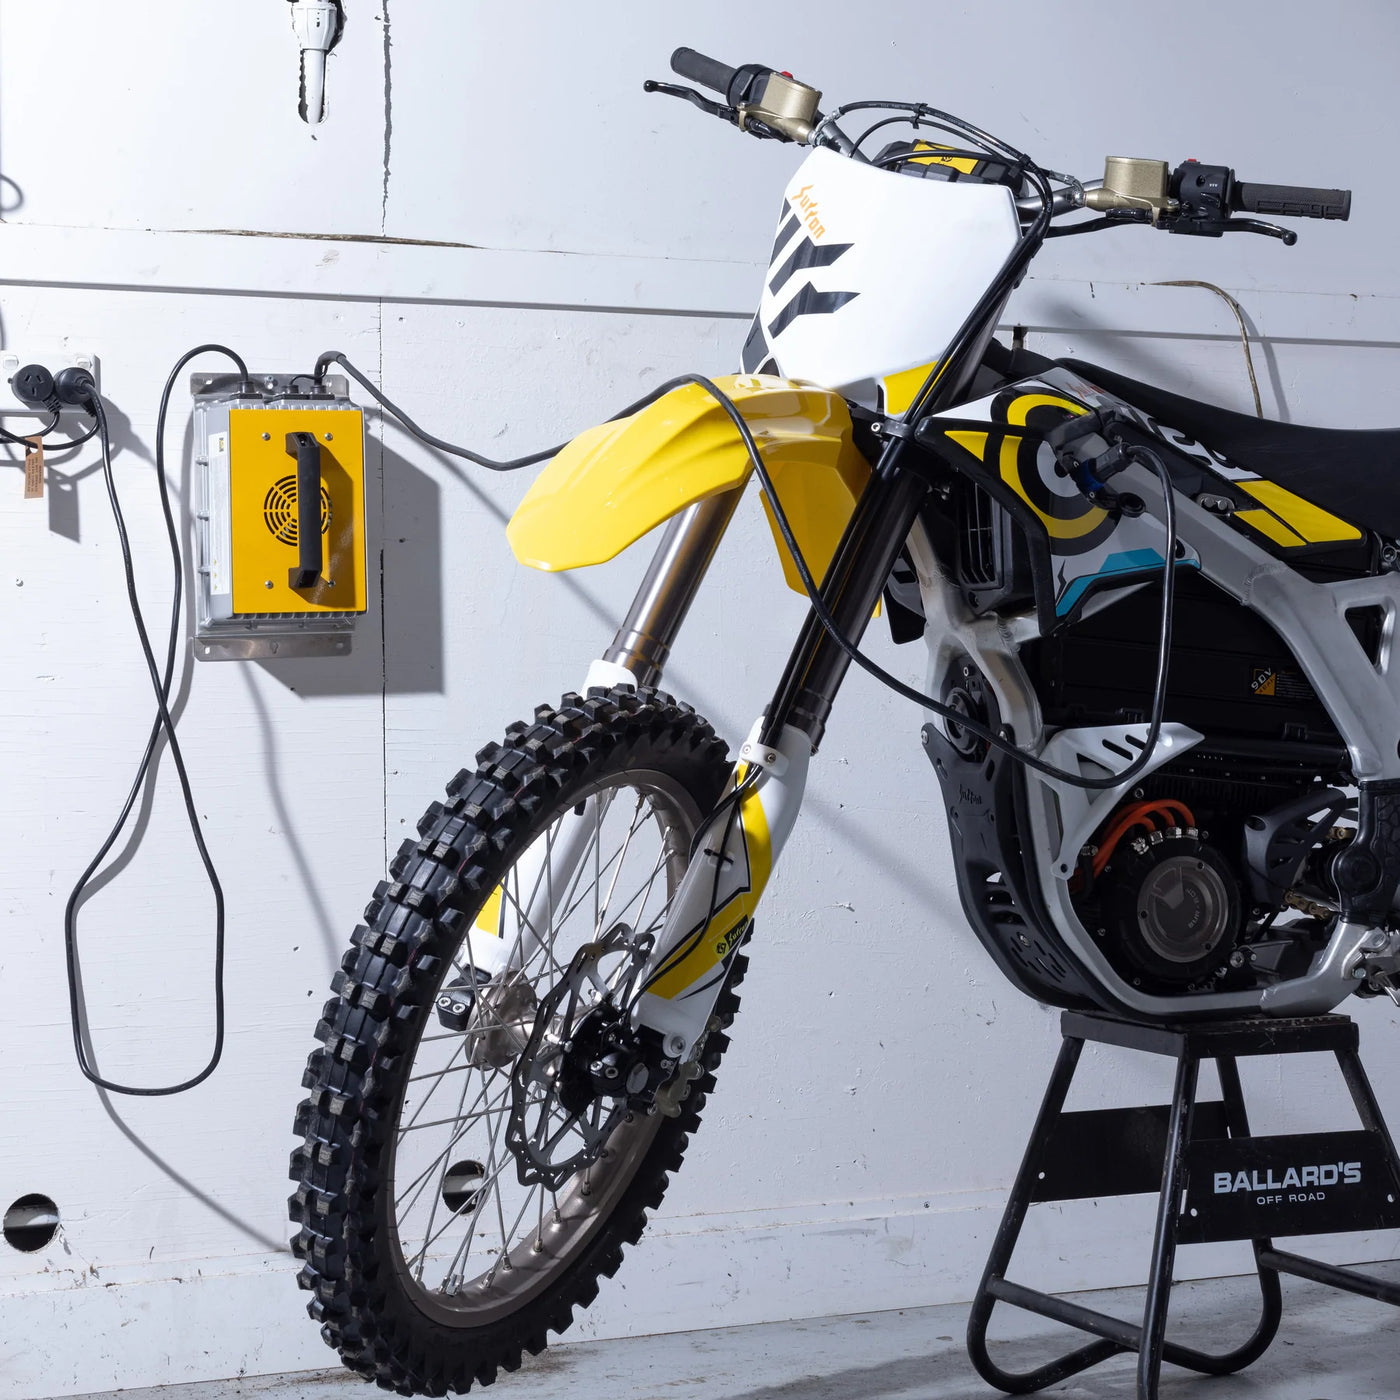 SURRON STORM BEE MX ELECTRIC DIRT BIKE (OFF ROAD) 6 MONTHS FREE SERVICE